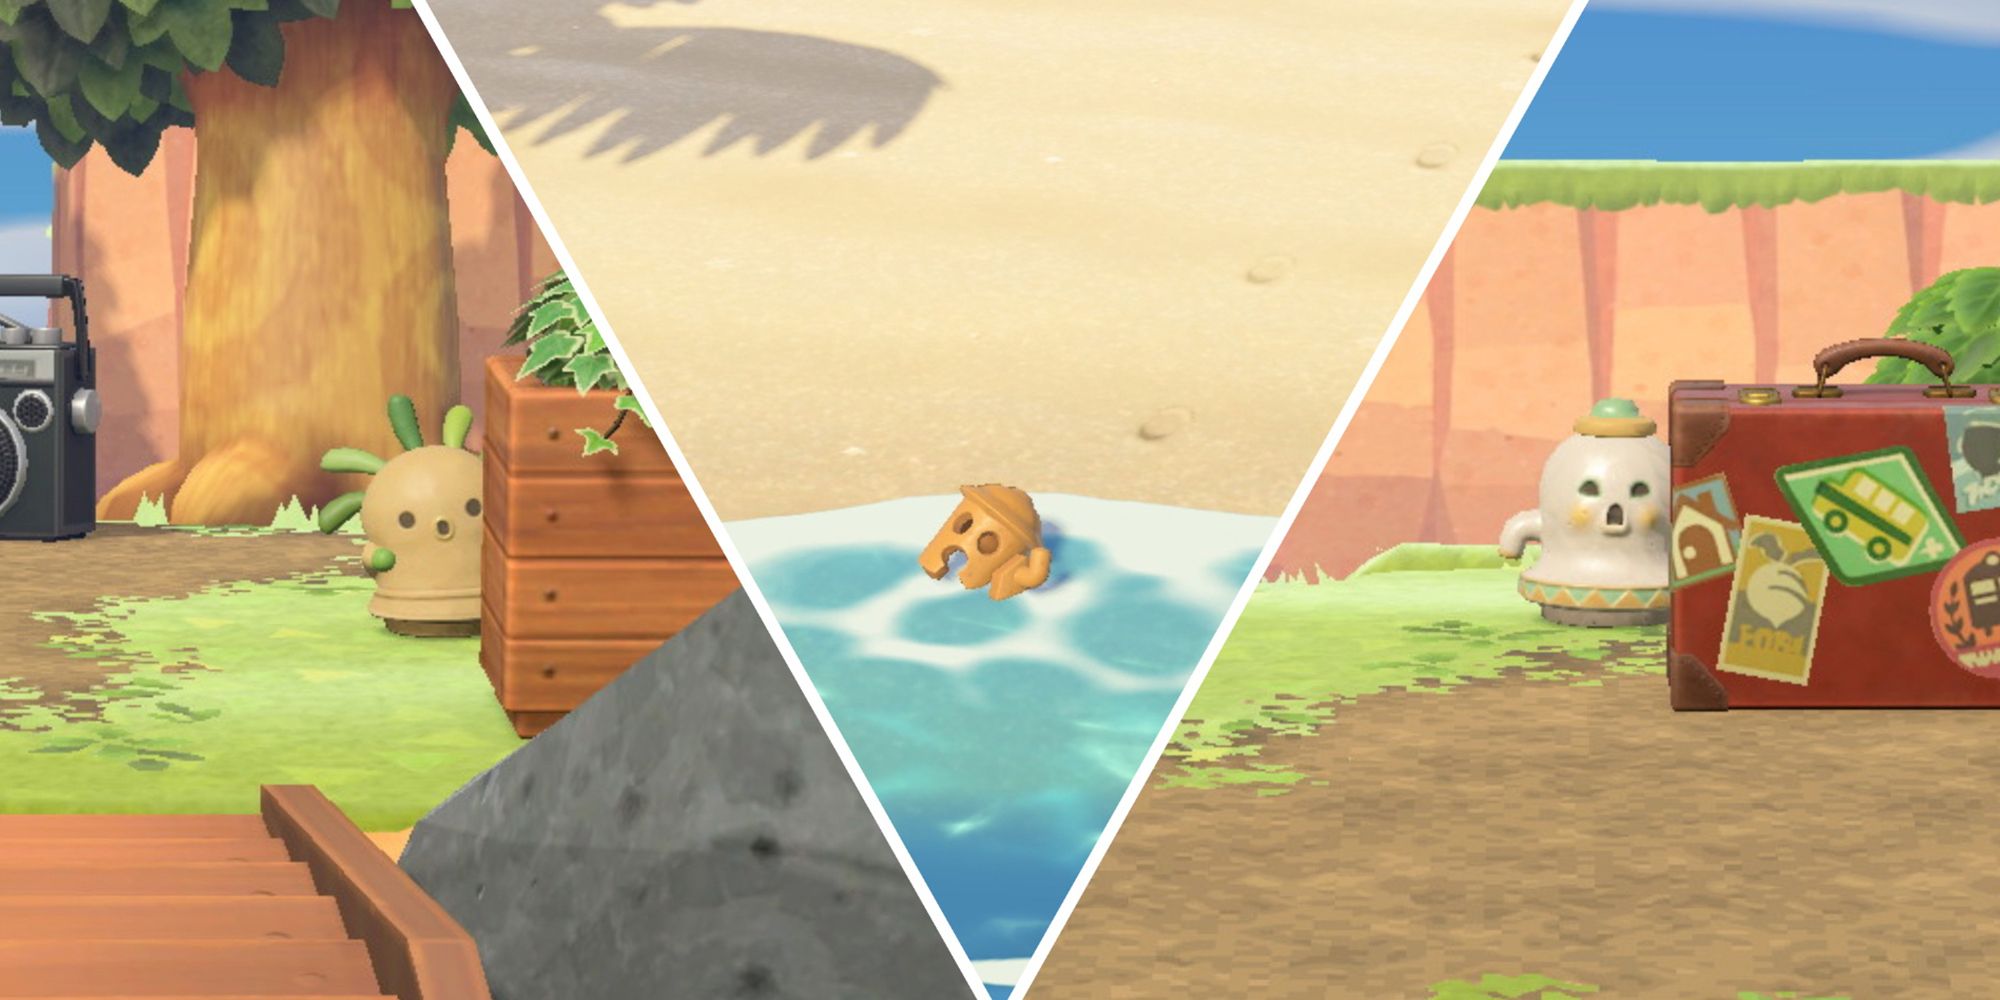 From left to right, squeakoid peeking out from behind wooden planter, a gyroid fragment washed up on the beach, and xylophoid dancing behind Rover’s suitcase